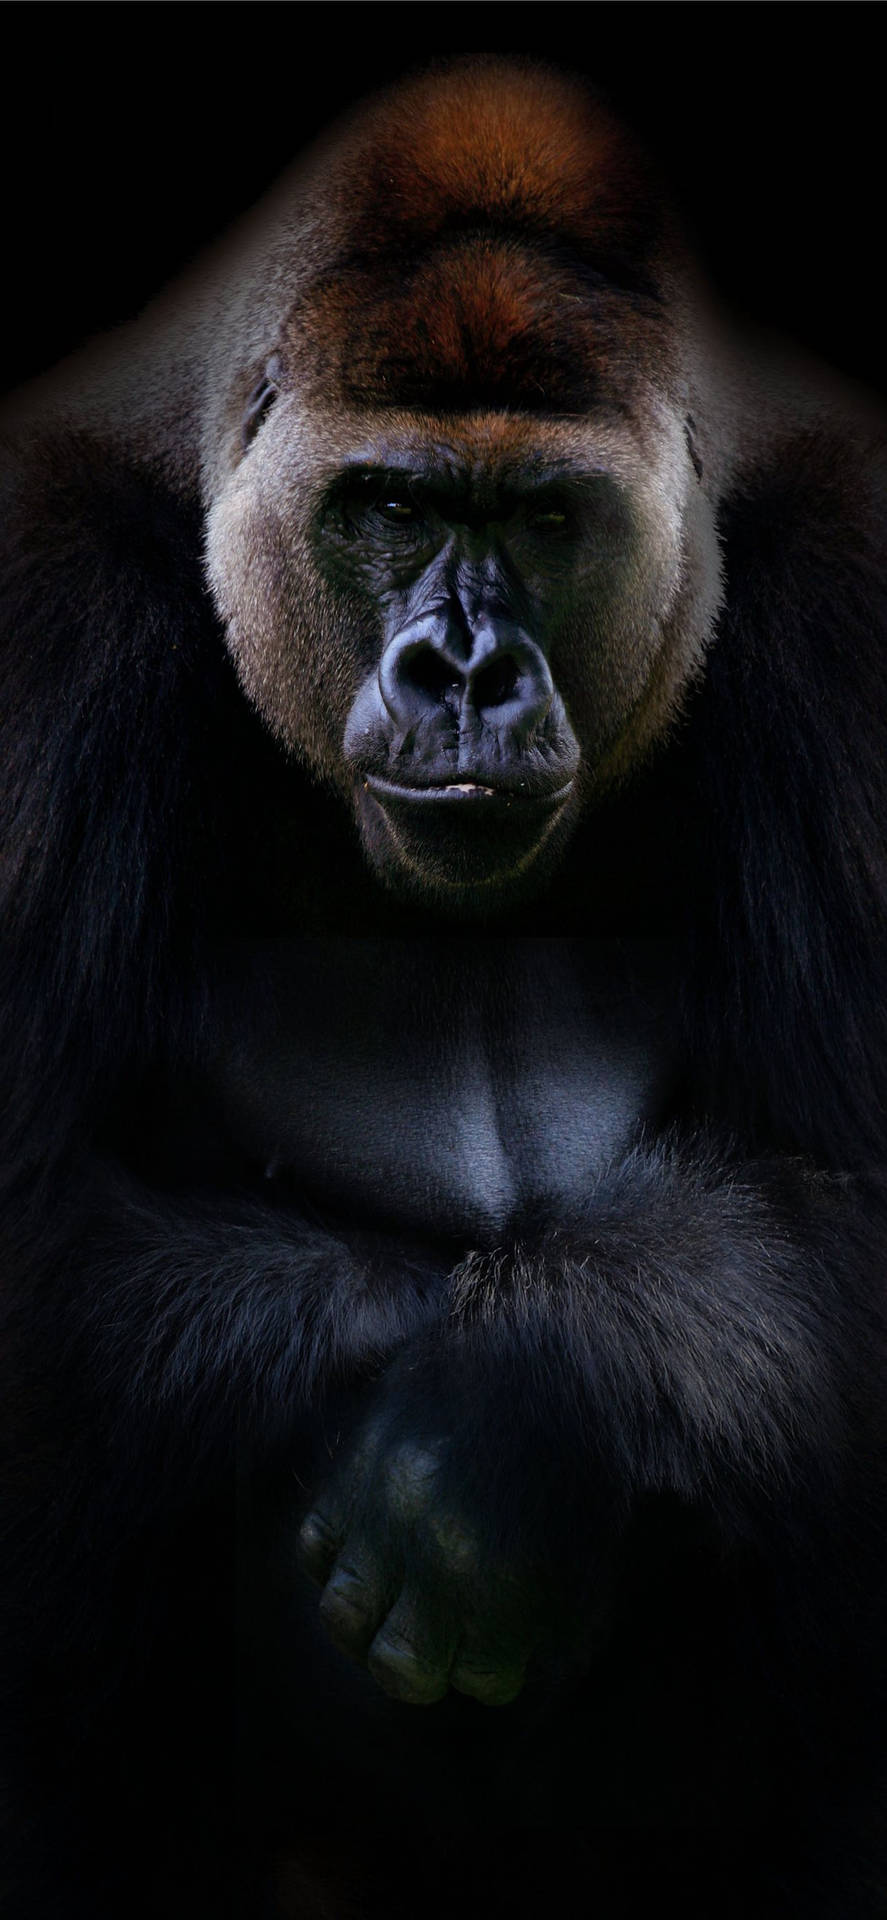 A cool and curious gorilla peers out from the tree branches Wallpaper